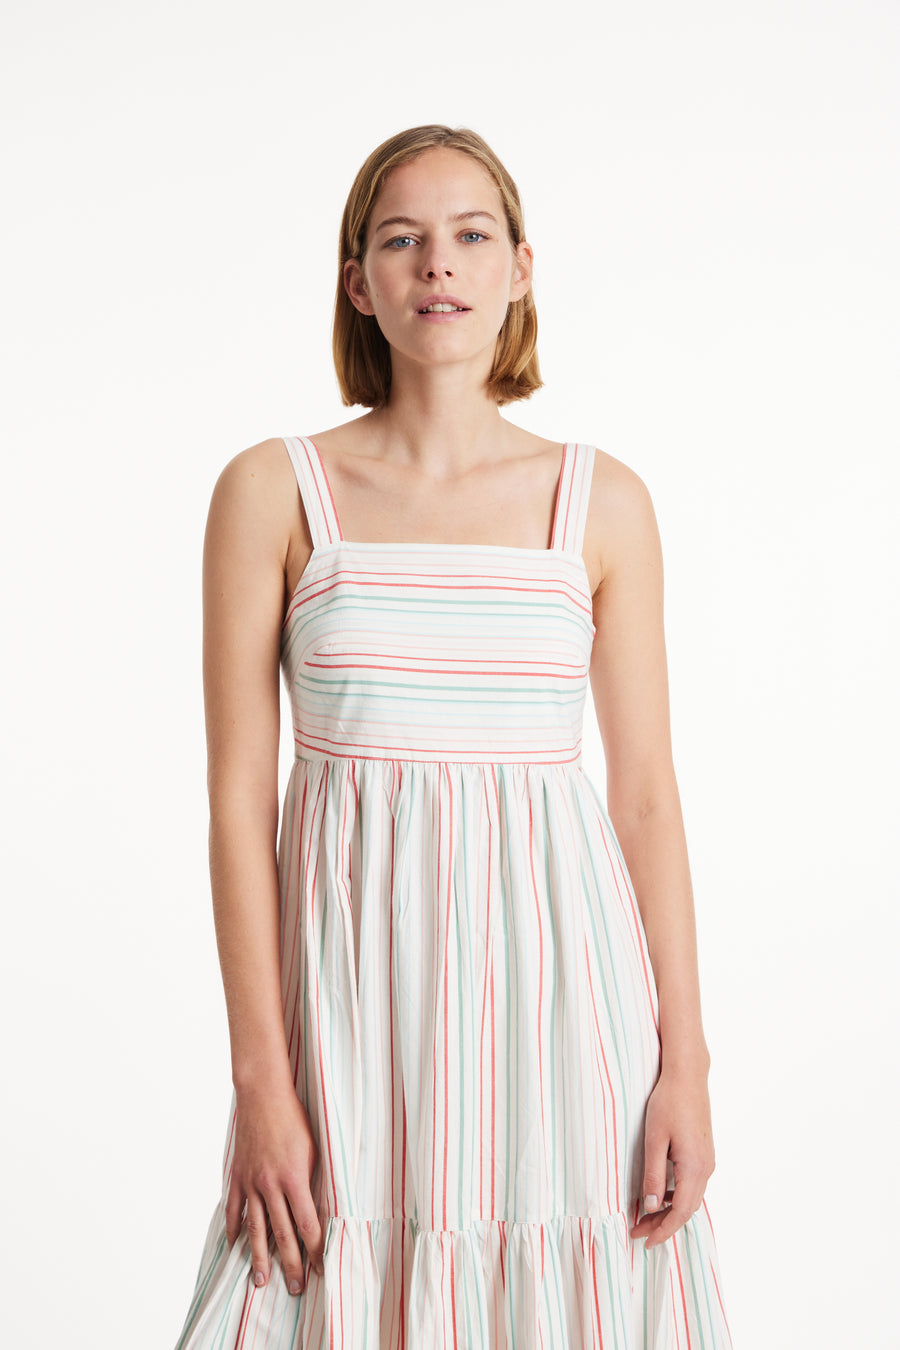 People Tree Fair Trade, Ethical & Sustainable Lea Striped Dress in Multi coloured 100% Organic Cotton